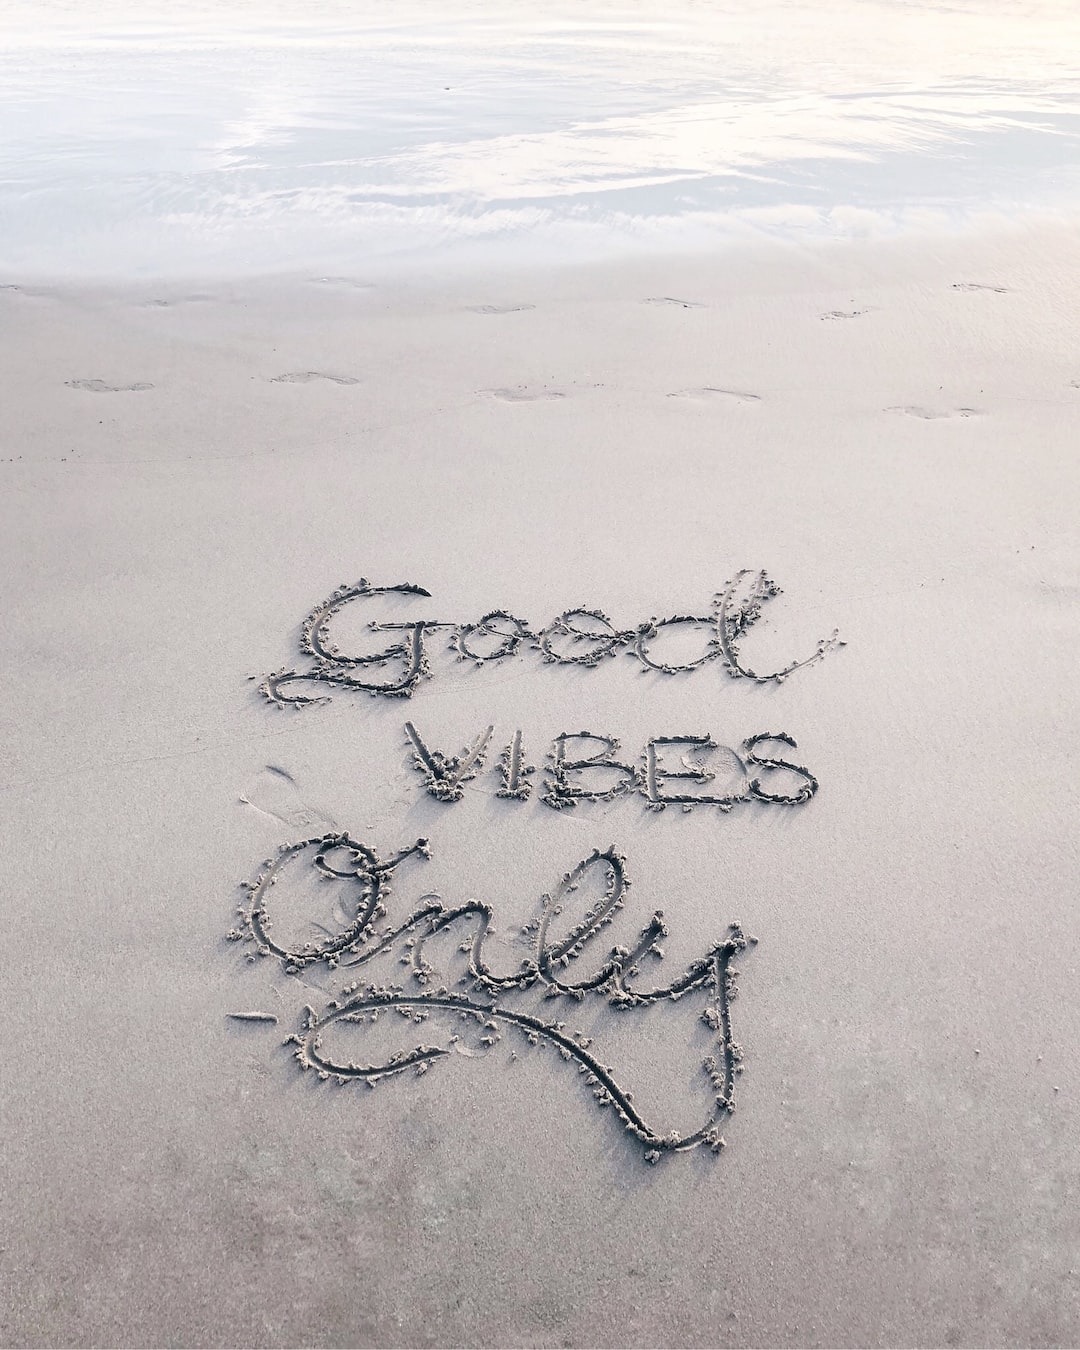 I have always loved calligraphy and if I see a spot to add some letters somewhere, I’ll usually do it. :) This was at Venice Beach, and the sand was so smooth, I had to add some words.